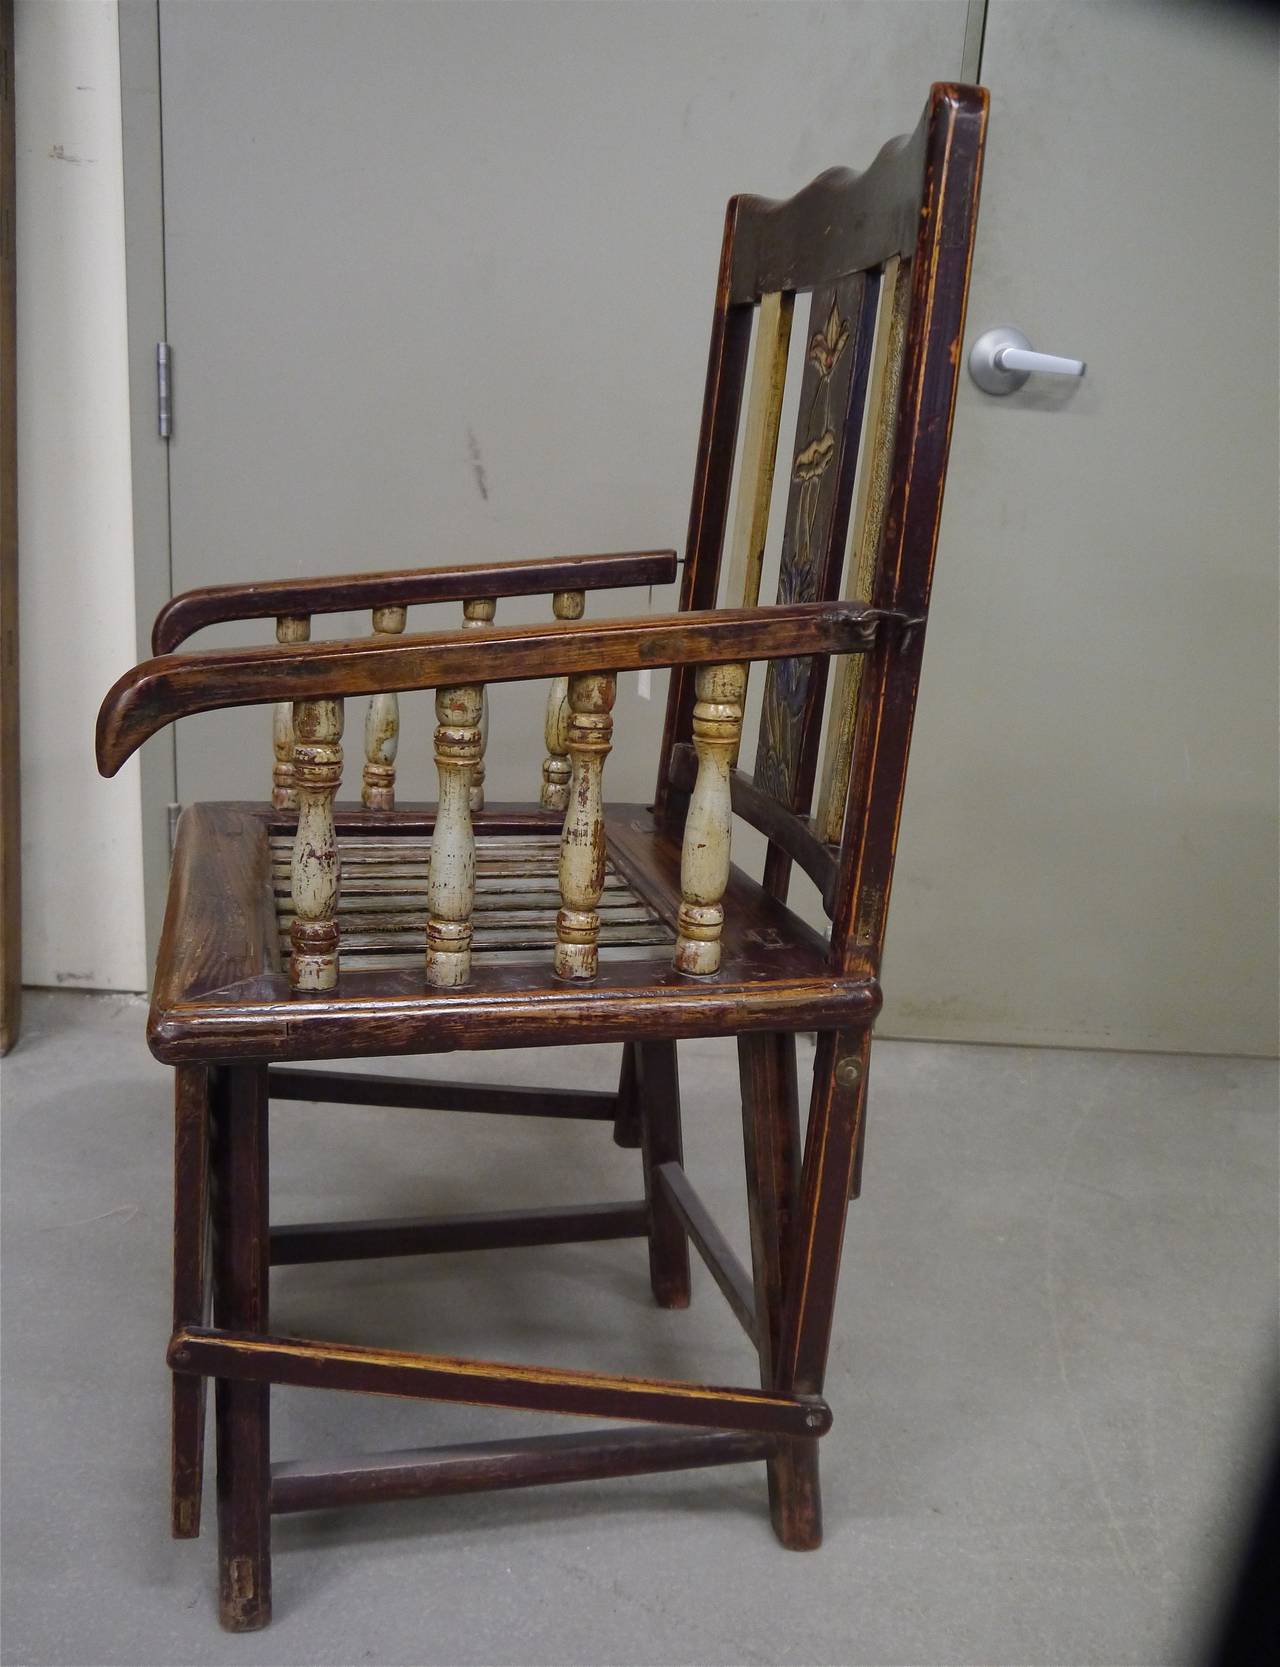 Excediing rare Chinese folding chair/launge chair. 
Excellent condition.